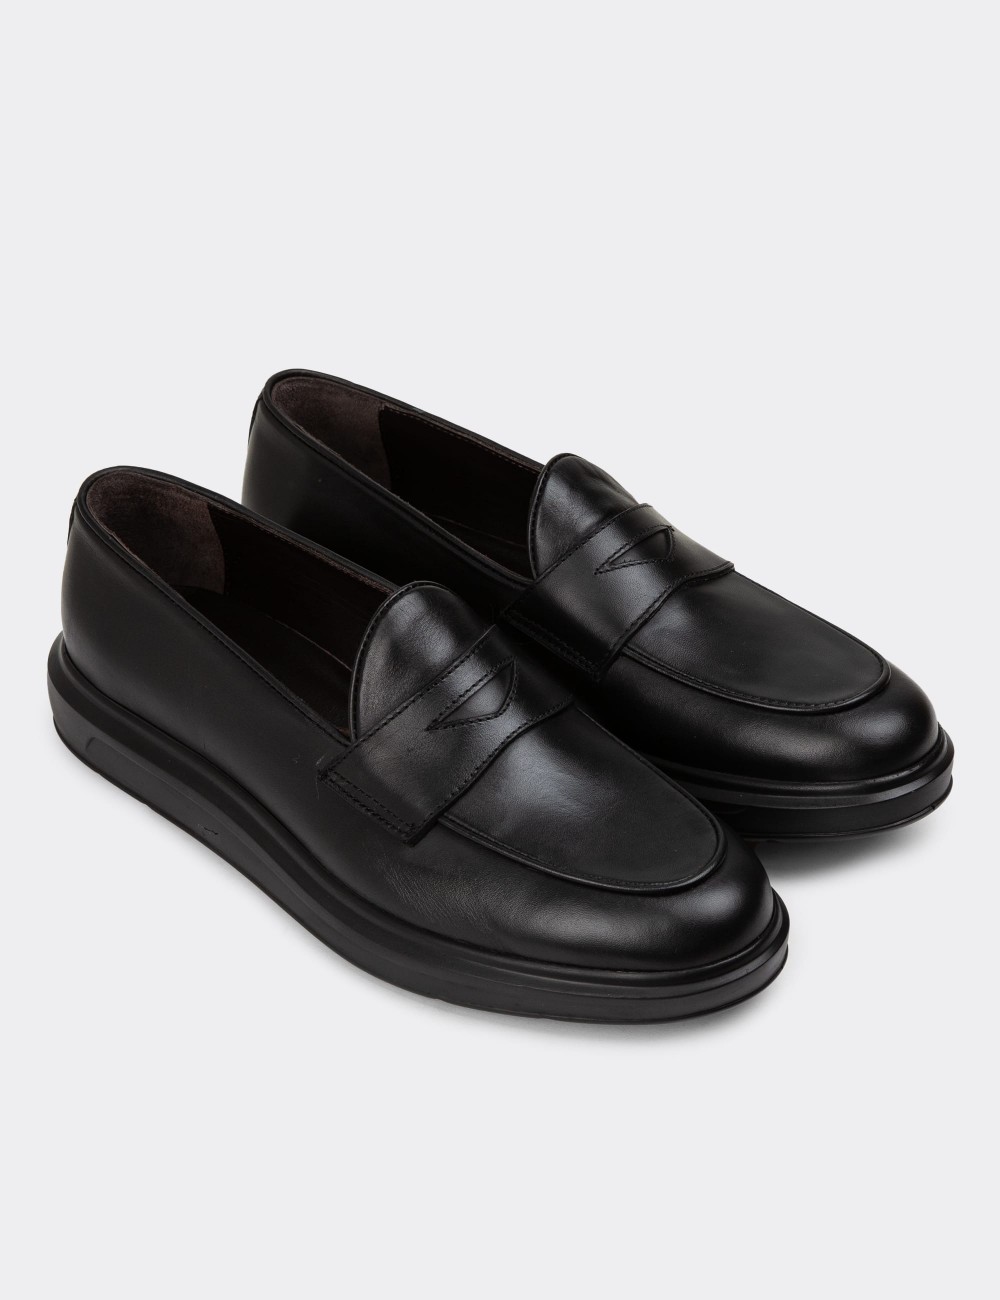 Black Leather Loafers - 01845MSYHP01